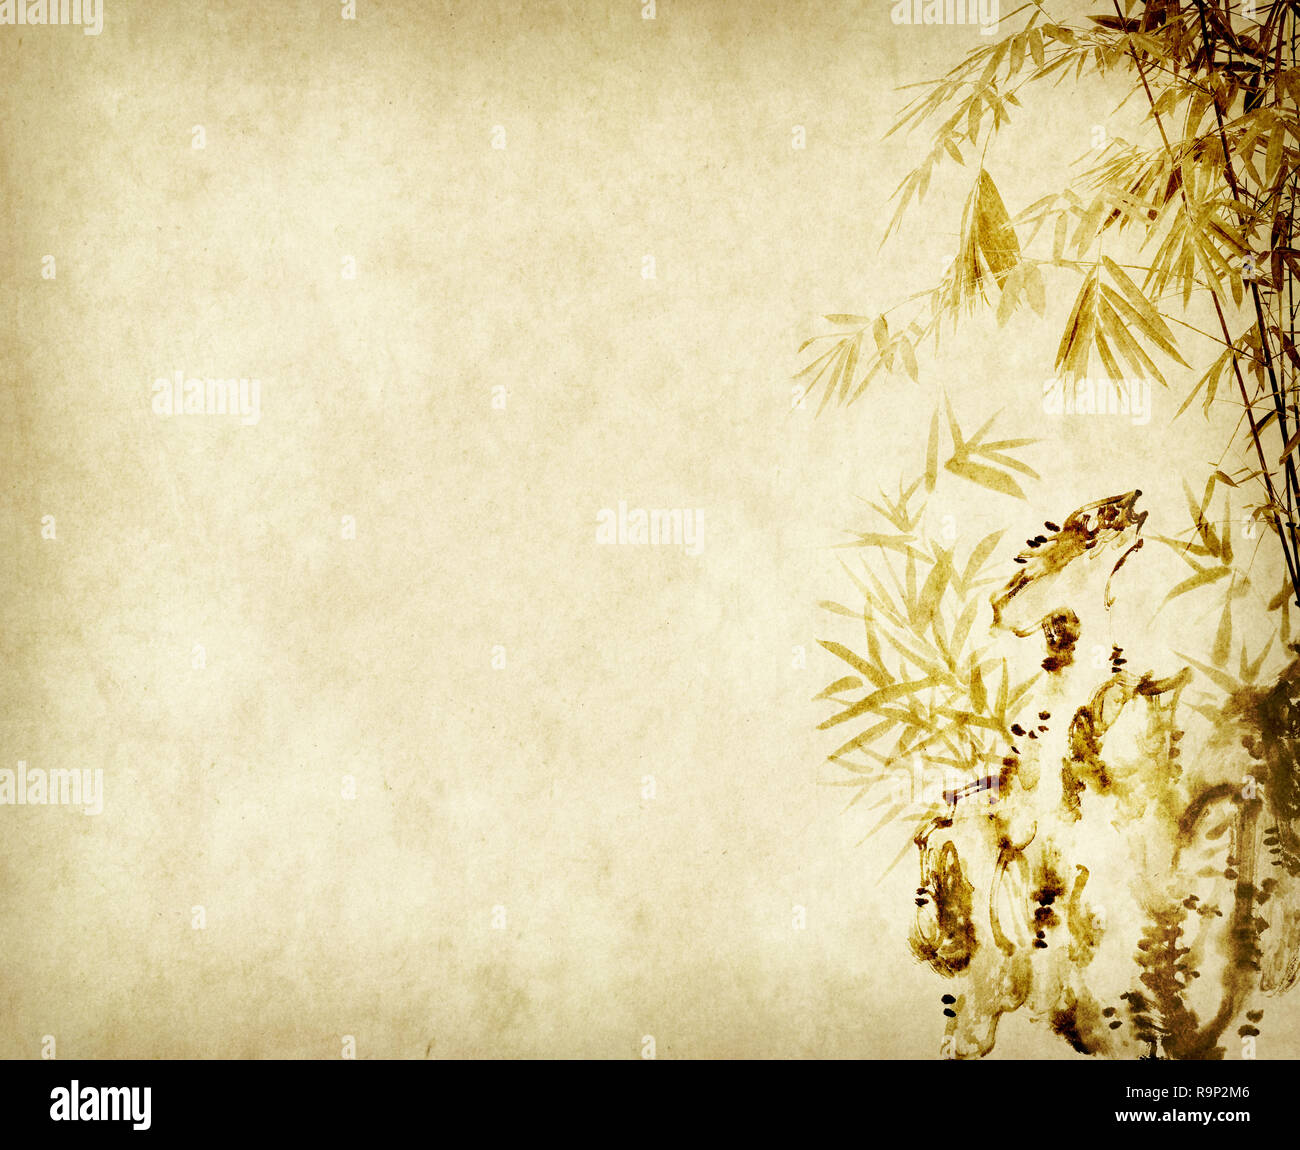 bamboo of Traditional chinese painting on old Paper Background Stock Photo  - Alamy